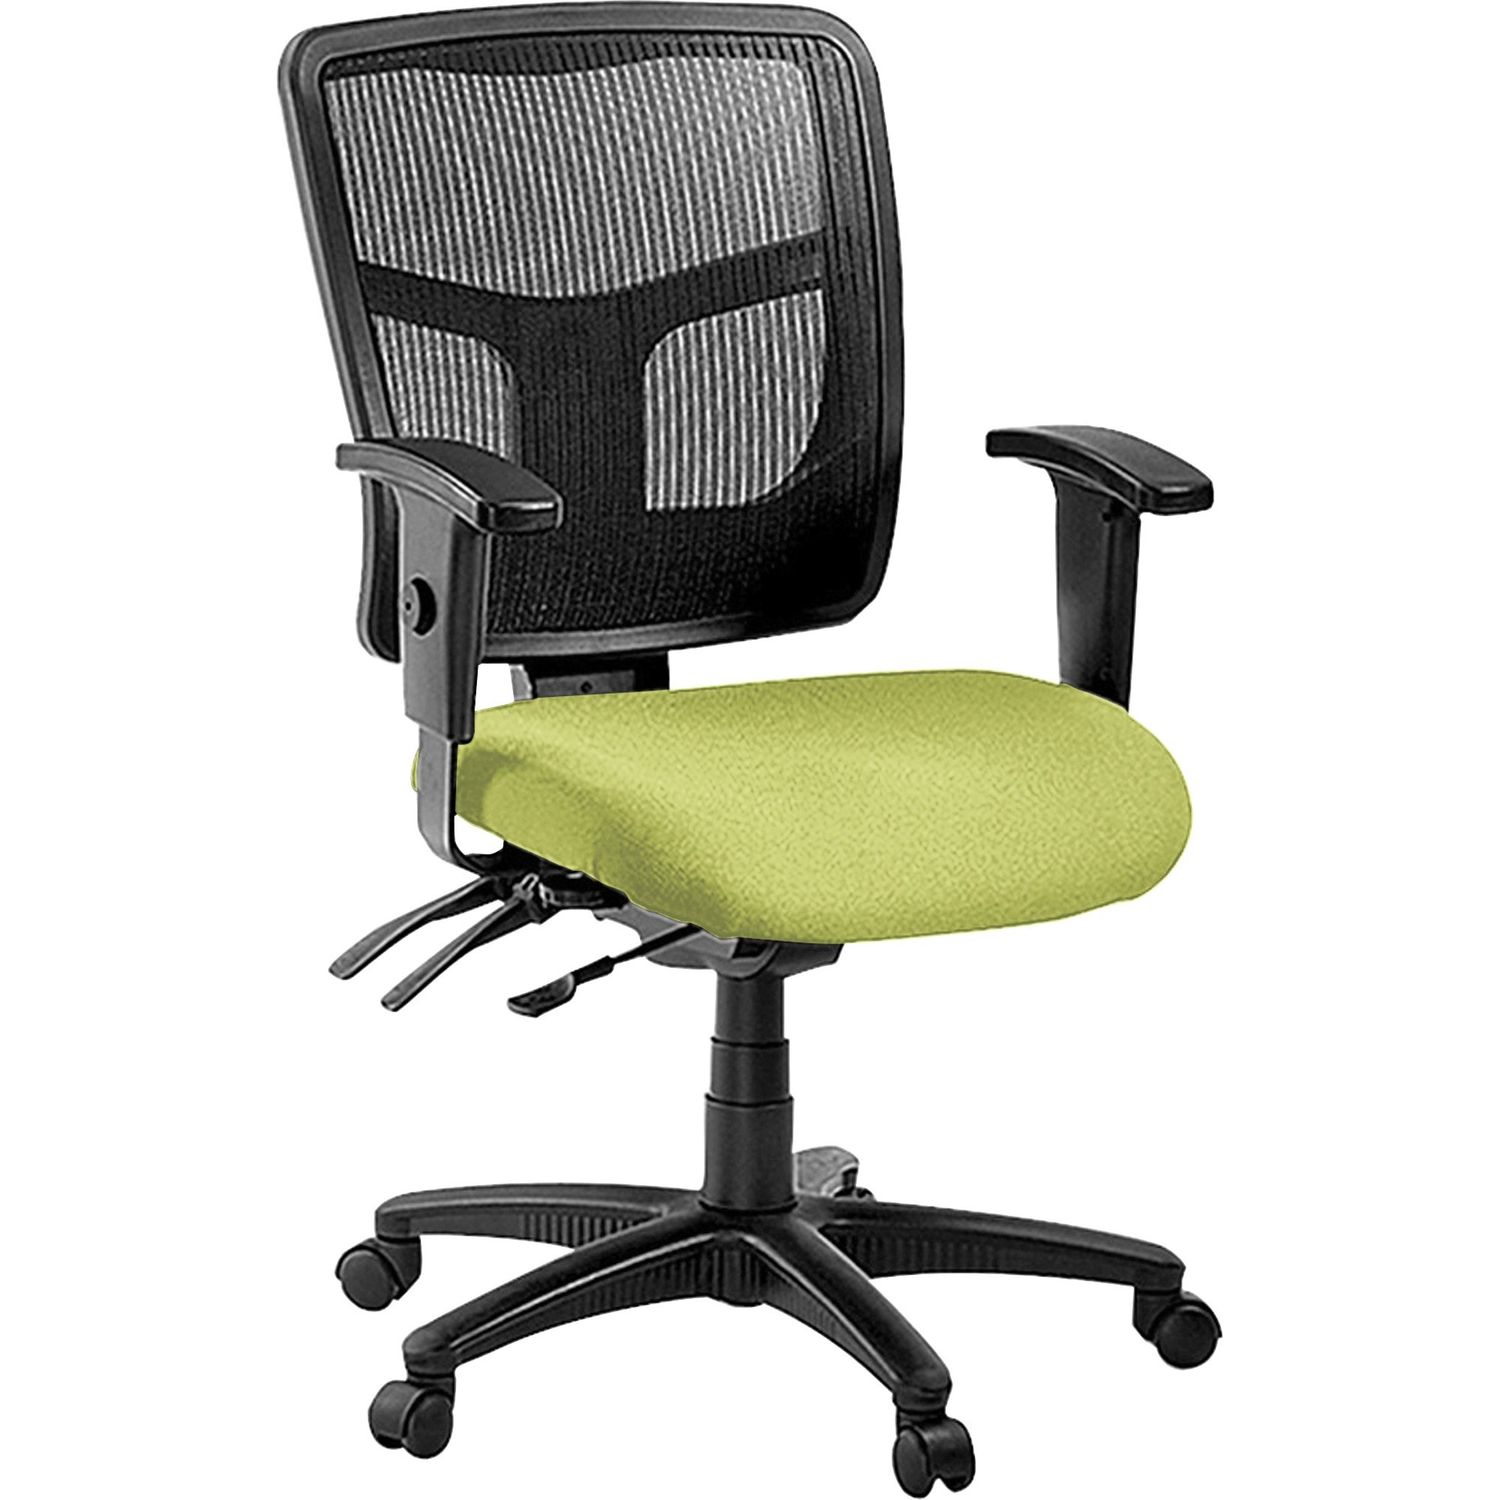 Managerial Mesh Mid-back Chair Green Fabric Seat, Black Back, Black Frame, Mid Back, 5-star Base, 1 Each